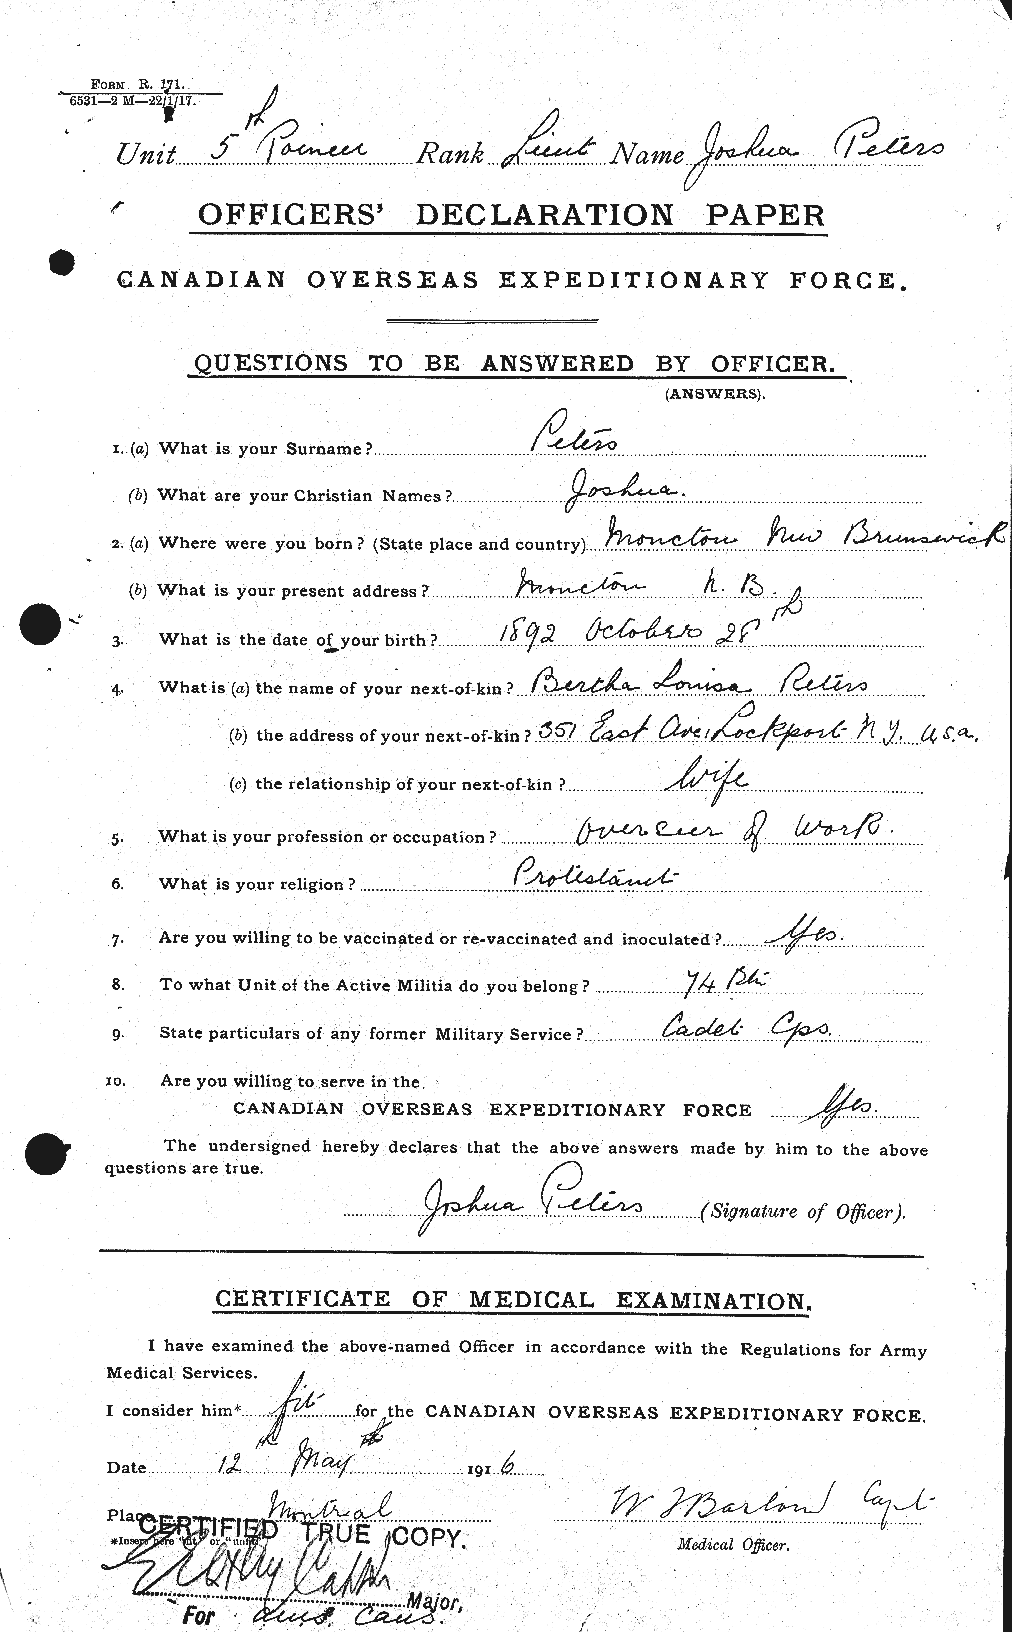 Personnel Records of the First World War - CEF 575563a